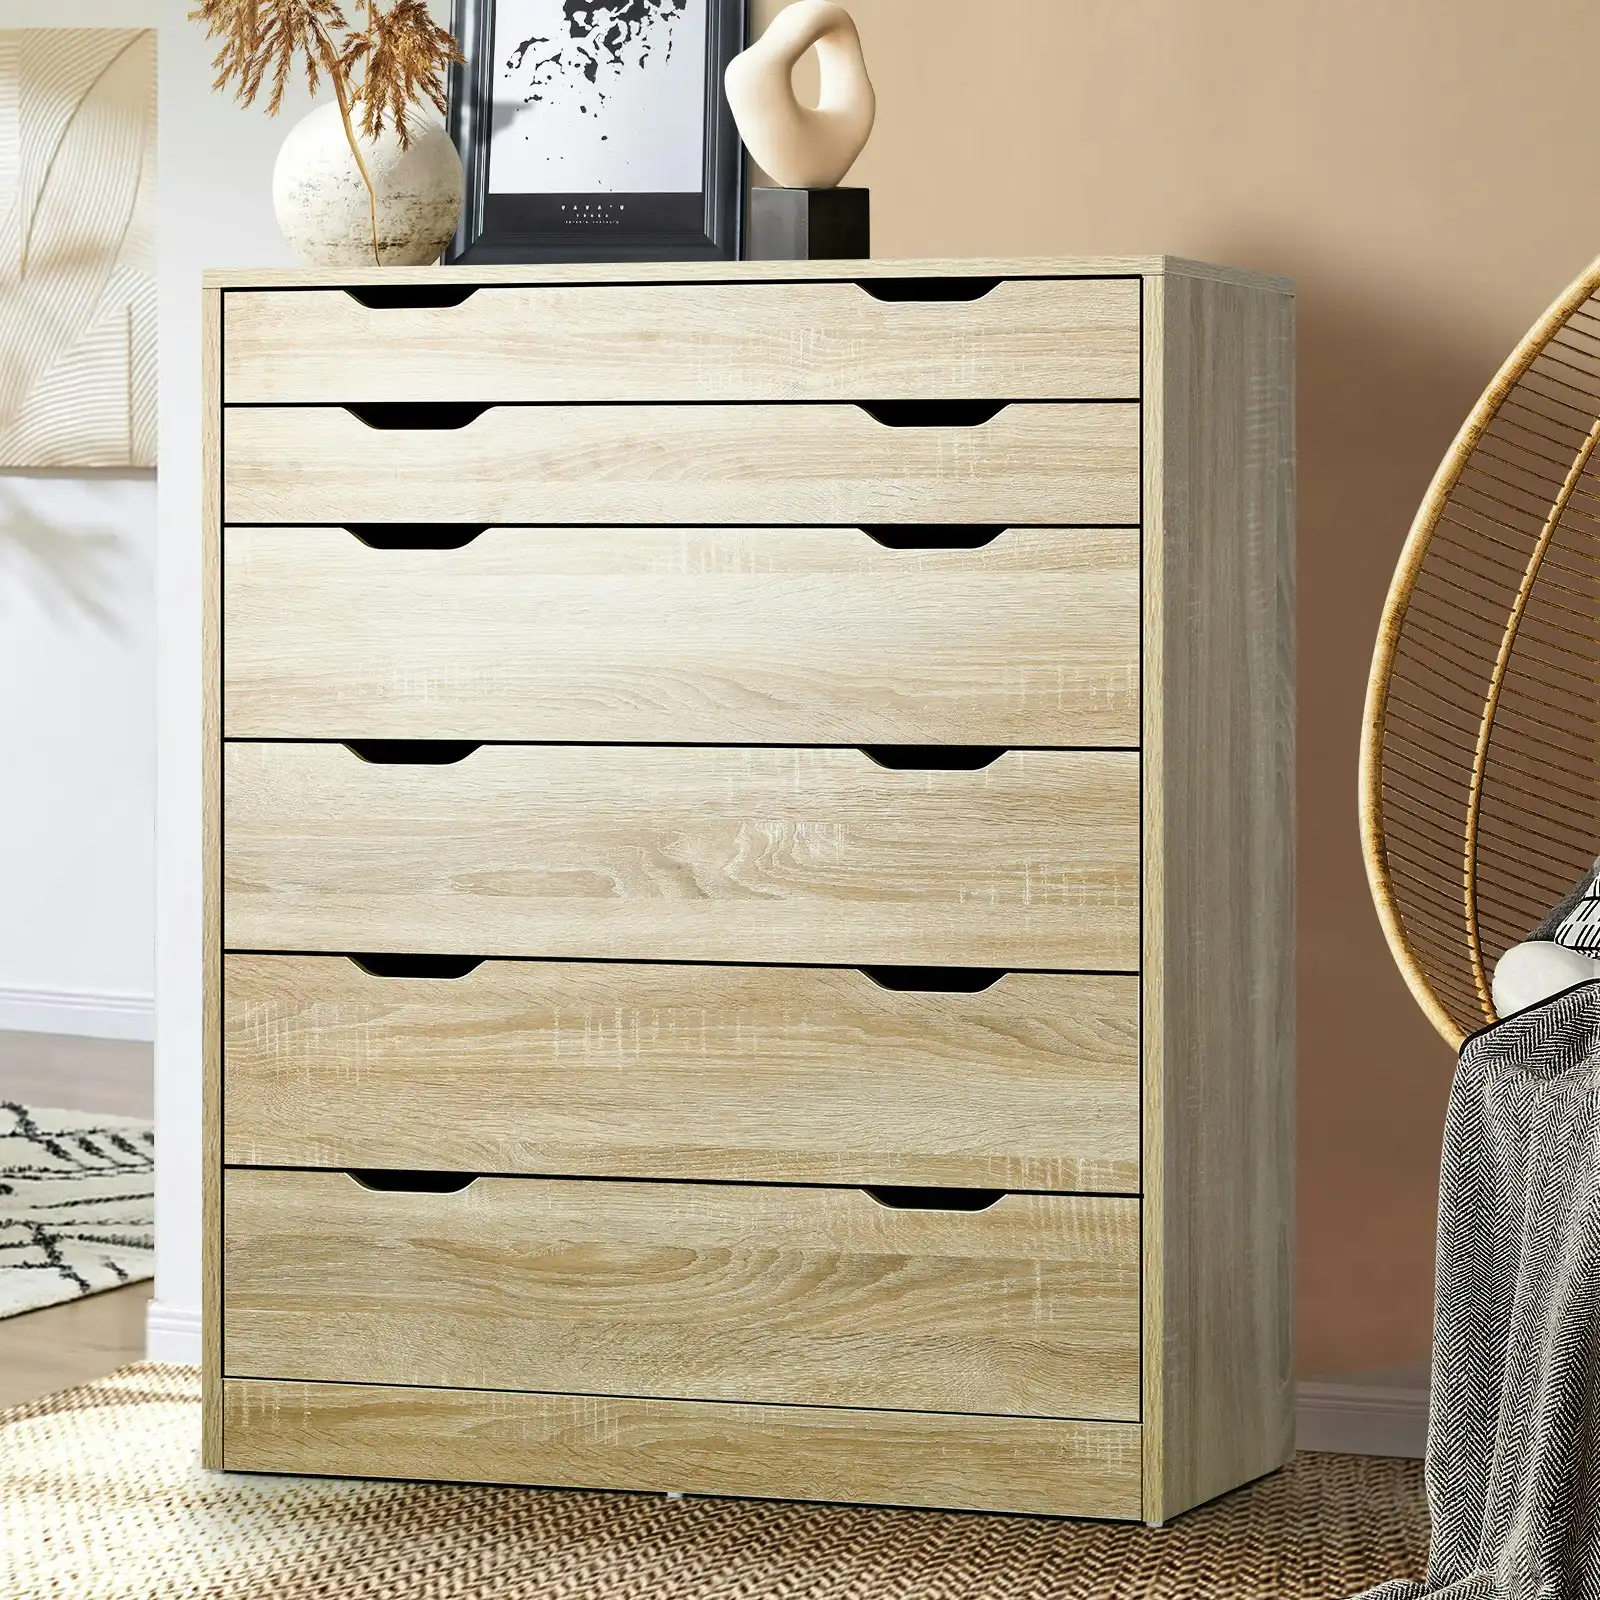 Oikiture 6 Chest of Drawers Tallboy Storage Cabinet Dresser Bedroom Wooden